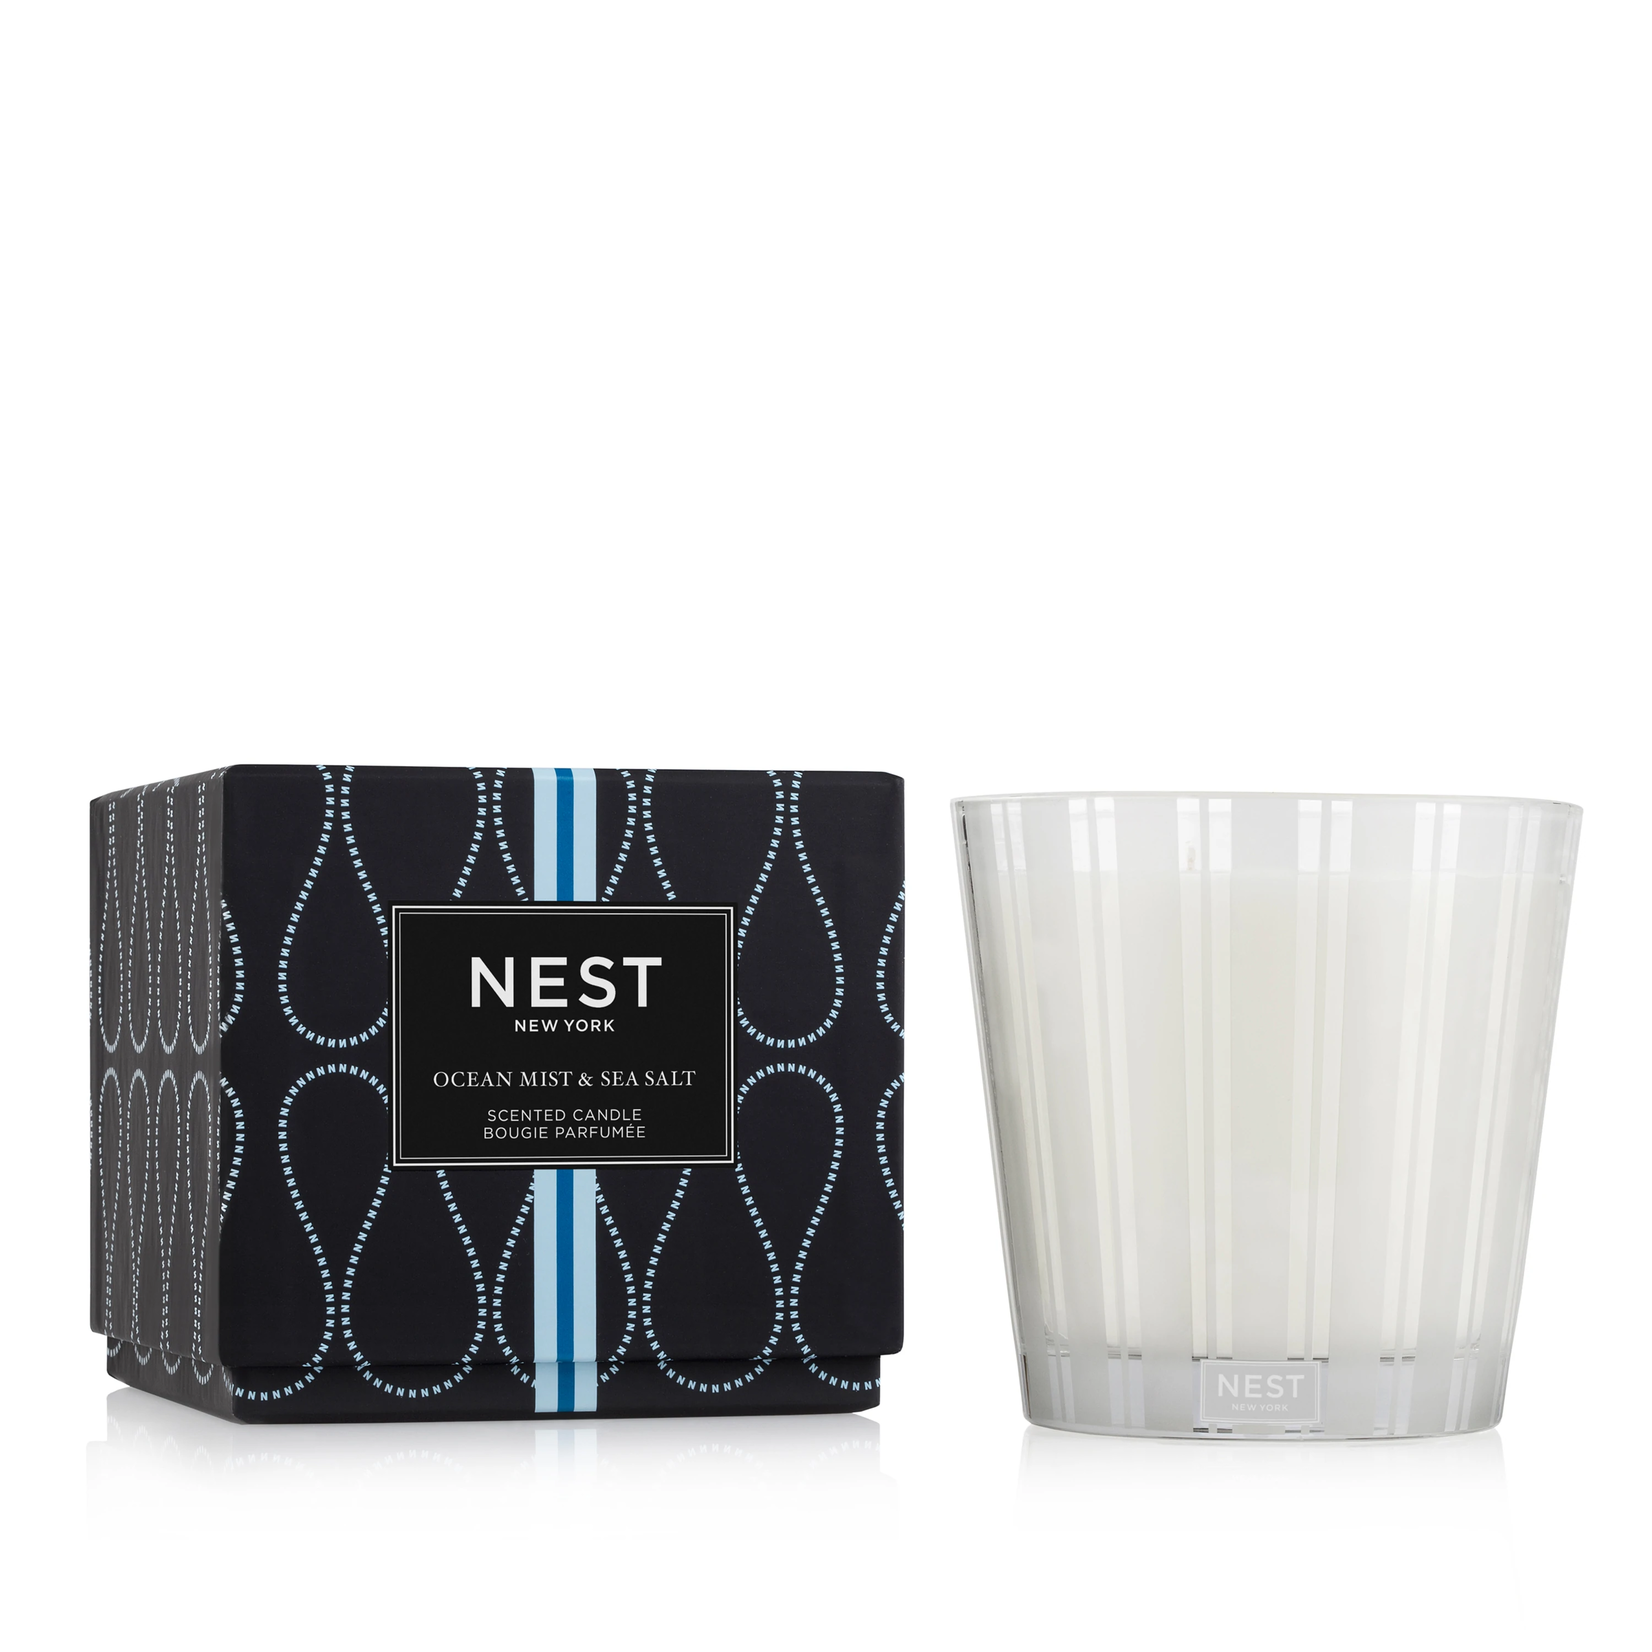 NEST, 3-Wick Candle 21.2 oz